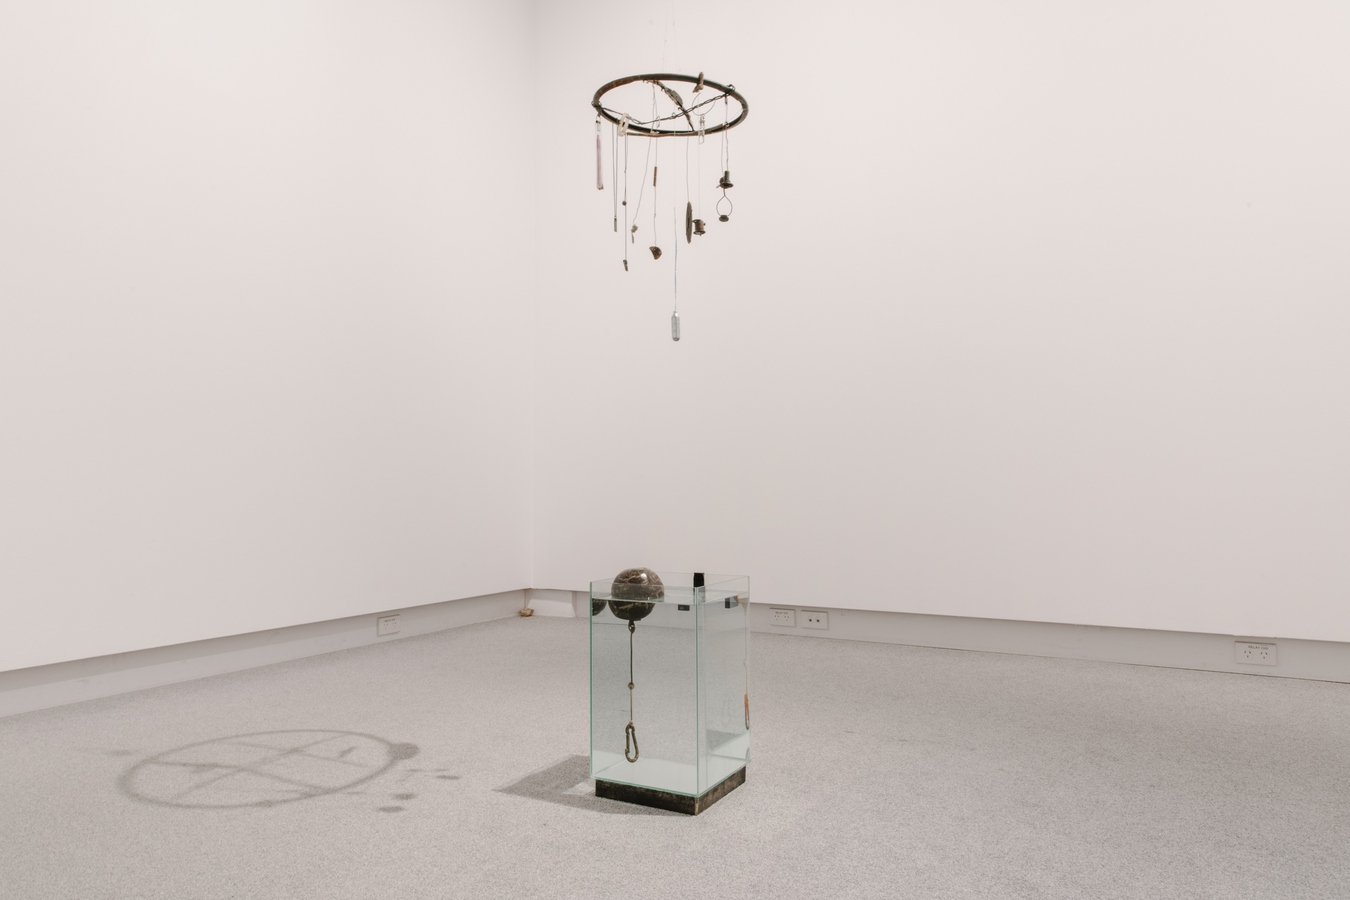 Image: Teresa Collins, Keyrings ring and The water goes sideways (installation view), 2022. Photo by Nancy Zhou.